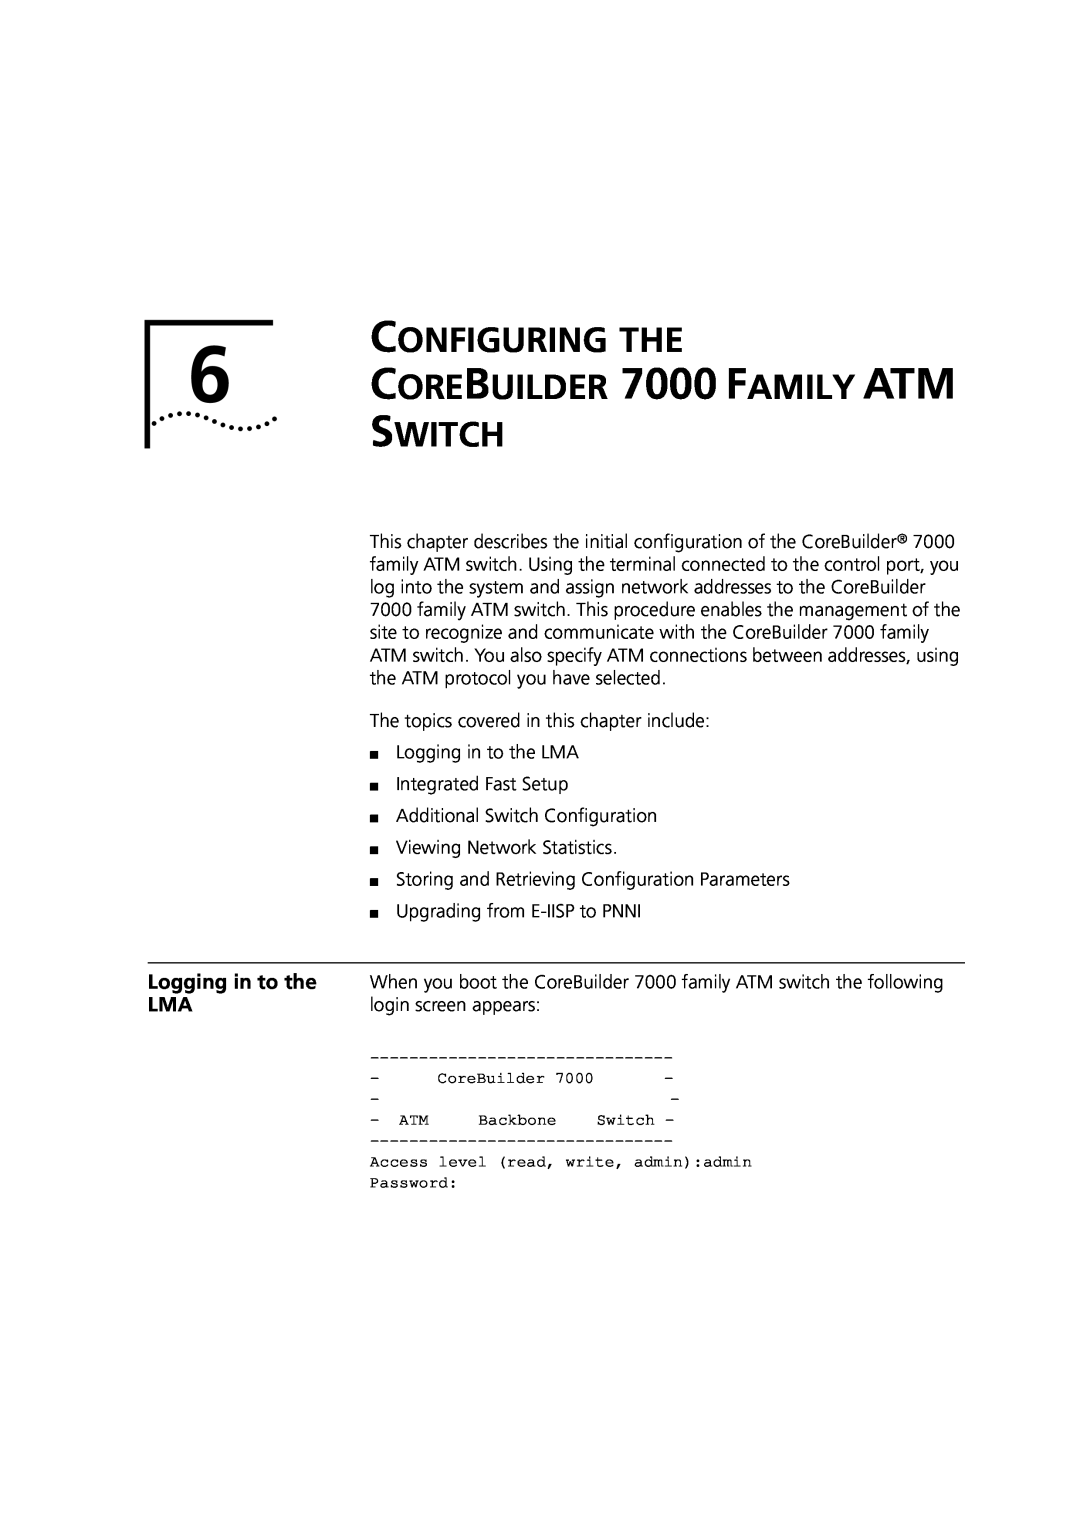 3Com manual CONFIGURING THE 6 COREBUILDER 7000 FAMILY ATM SWITCH, Logging in to the 